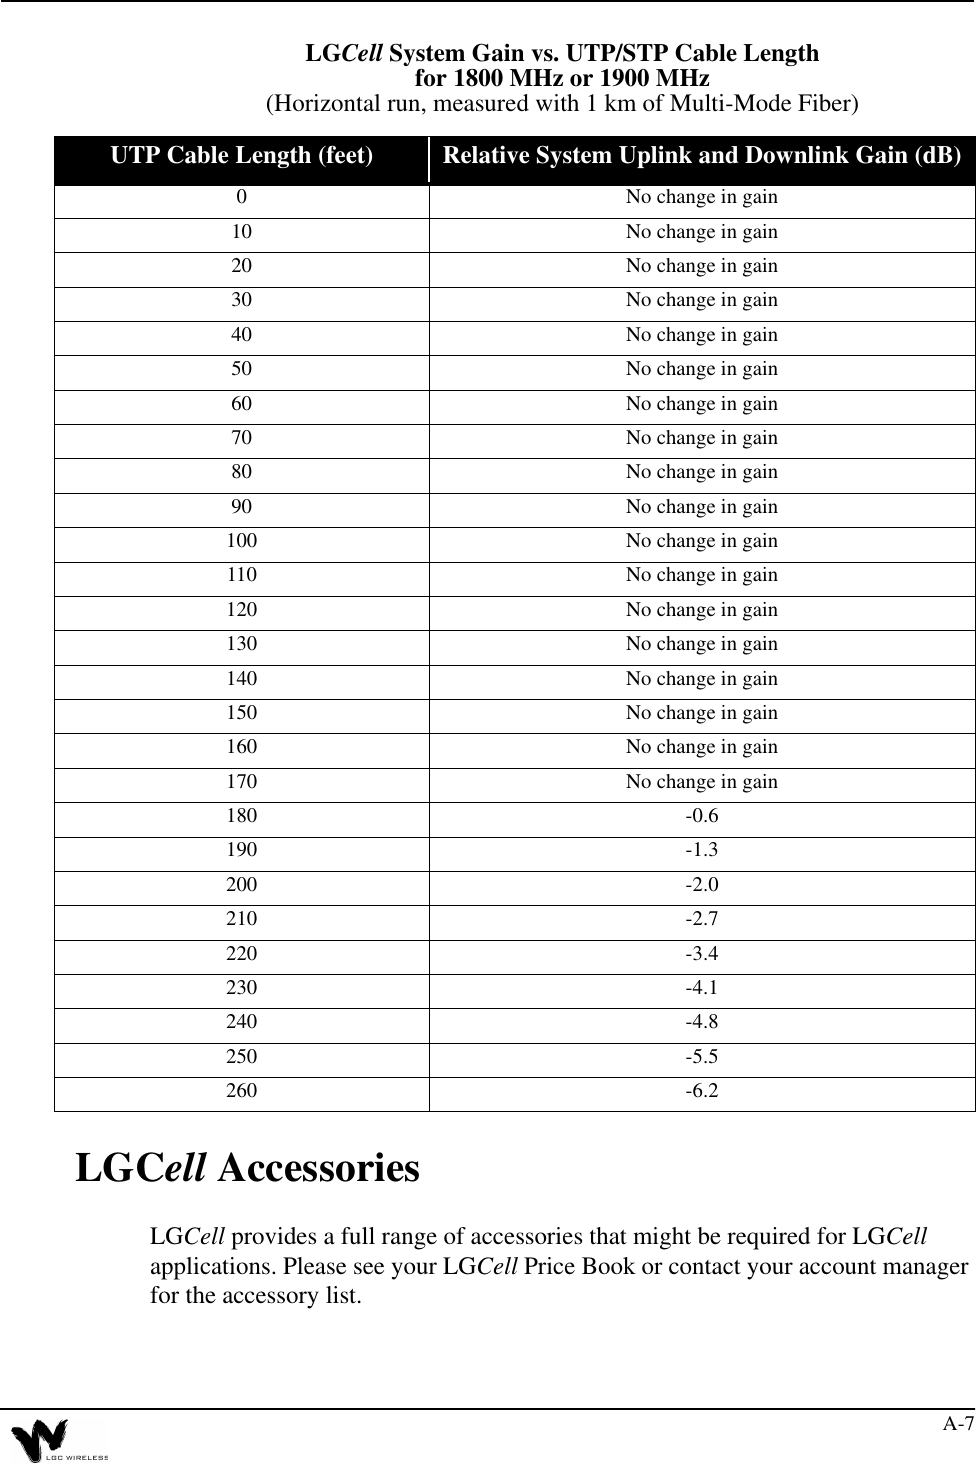 A-7LGCell System Gain vs. UTP/STP Cable Lengthfor 1800 MHz or 1900 MHz(Horizontal run, measured with 1 km of Multi-Mode Fiber)LGCell AccessoriesLGCell provides a full range of accessories that might be required for LGCell applications. Please see your LGCell Price Book or contact your account manager for the accessory list.UTP Cable Length (feet) Relative System Uplink and Downlink Gain (dB)0 No change in gain10 No change in gain20 No change in gain30 No change in gain40 No change in gain50 No change in gain60 No change in gain70 No change in gain80 No change in gain90 No change in gain100 No change in gain110 No change in gain120 No change in gain130 No change in gain140 No change in gain150 No change in gain160 No change in gain170 No change in gain180 -0.6190 -1.3200 -2.0210 -2.7220 -3.4230 -4.1240 -4.8250 -5.5260 -6.2